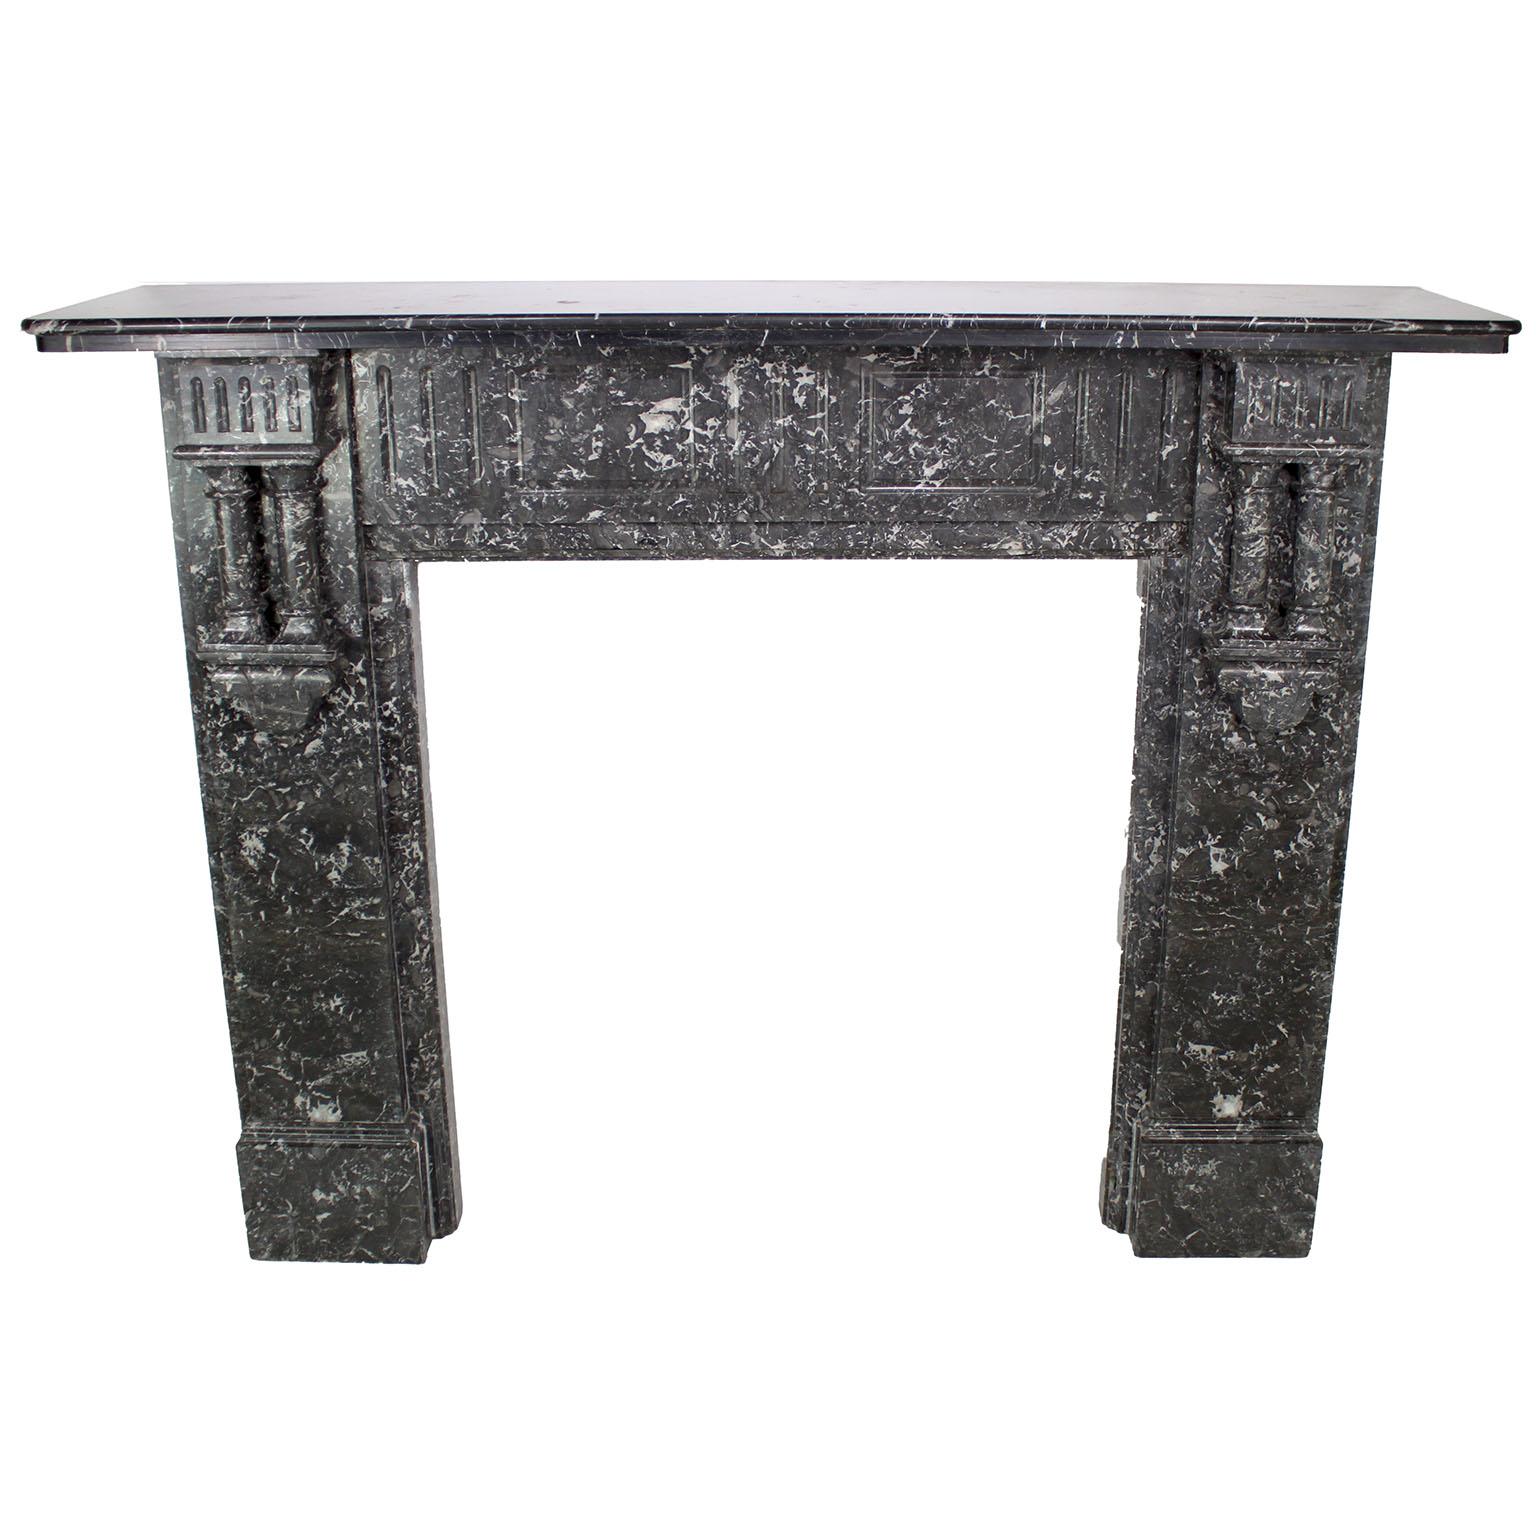 French 19th-20th Century Louis XVI Style Veined Grey Marble Fireplace Mantel In Good Condition For Sale In Los Angeles, CA